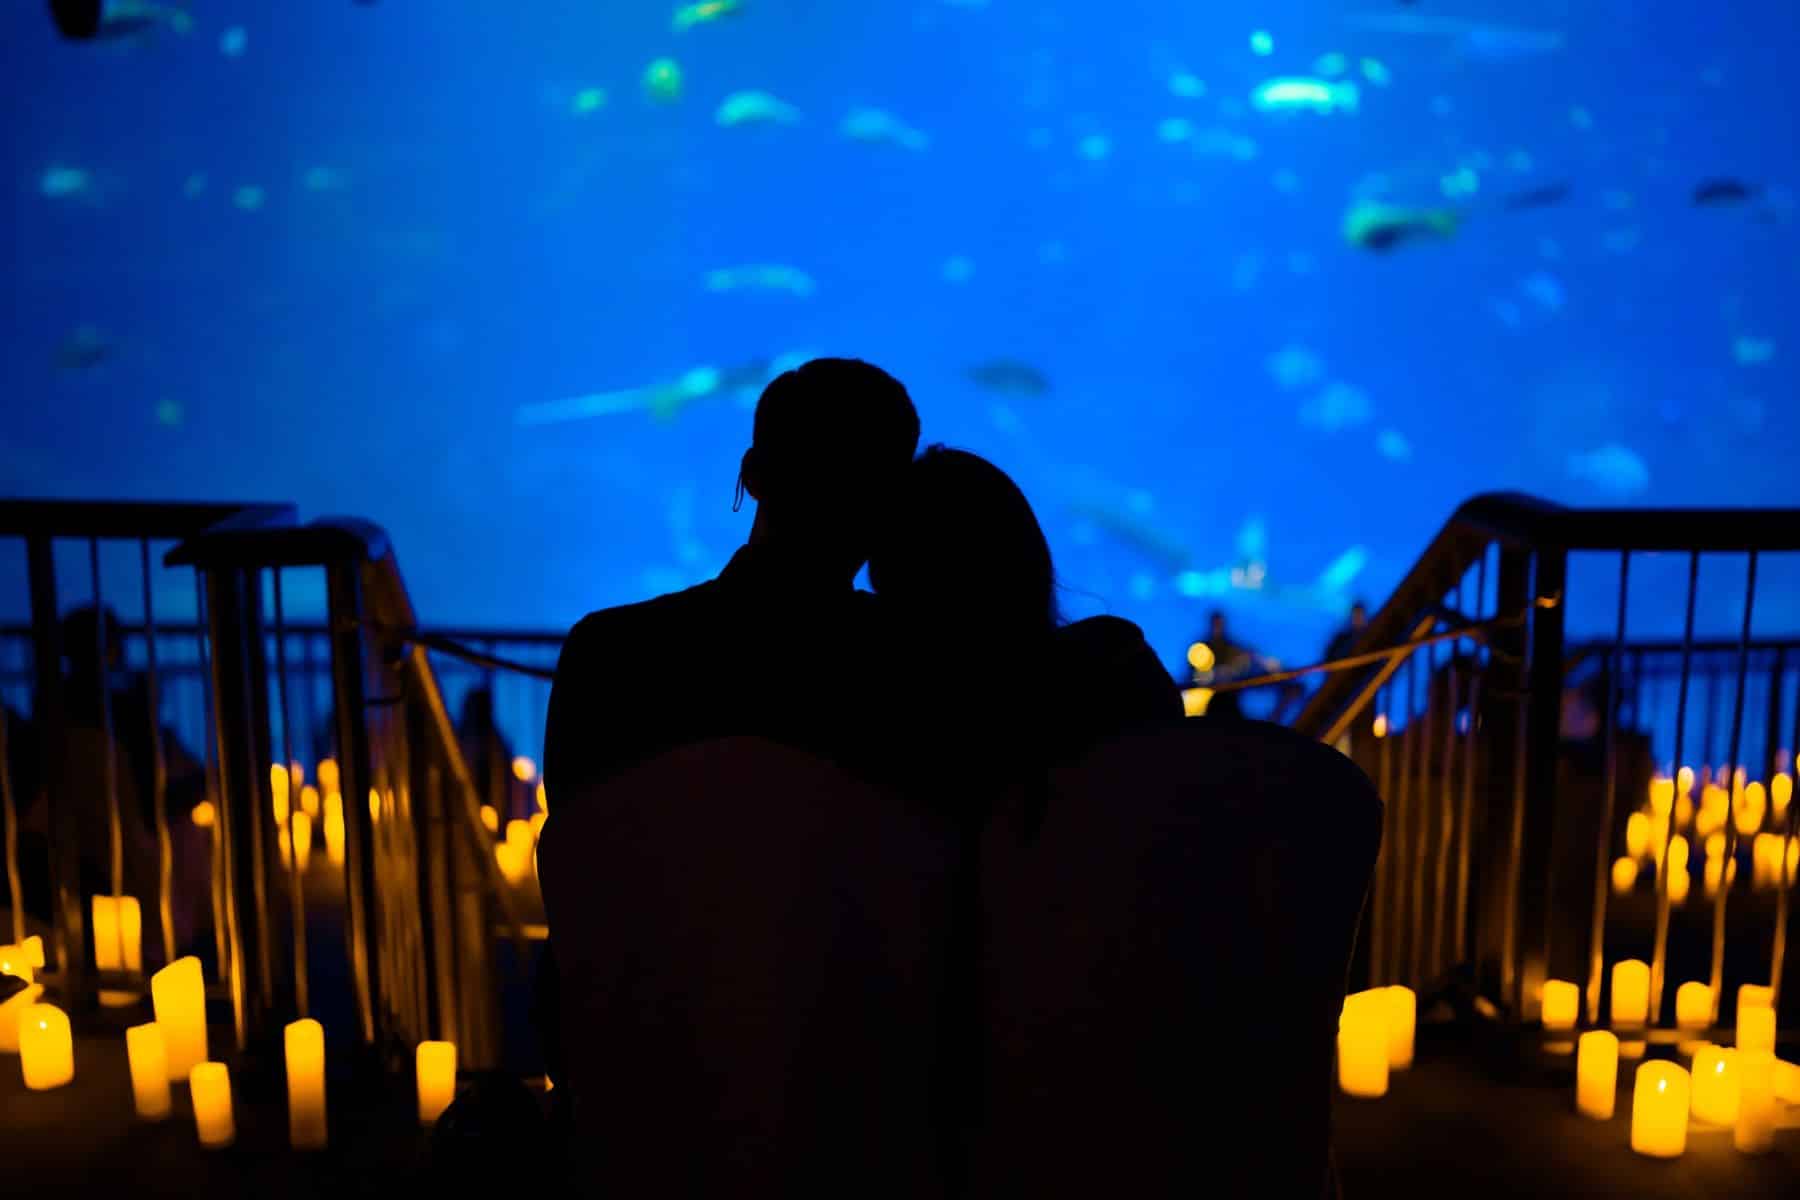 The silhouette of a couple leaning on one another while sitting on stairs watching the fish at an aquarium, surrounded by candles.